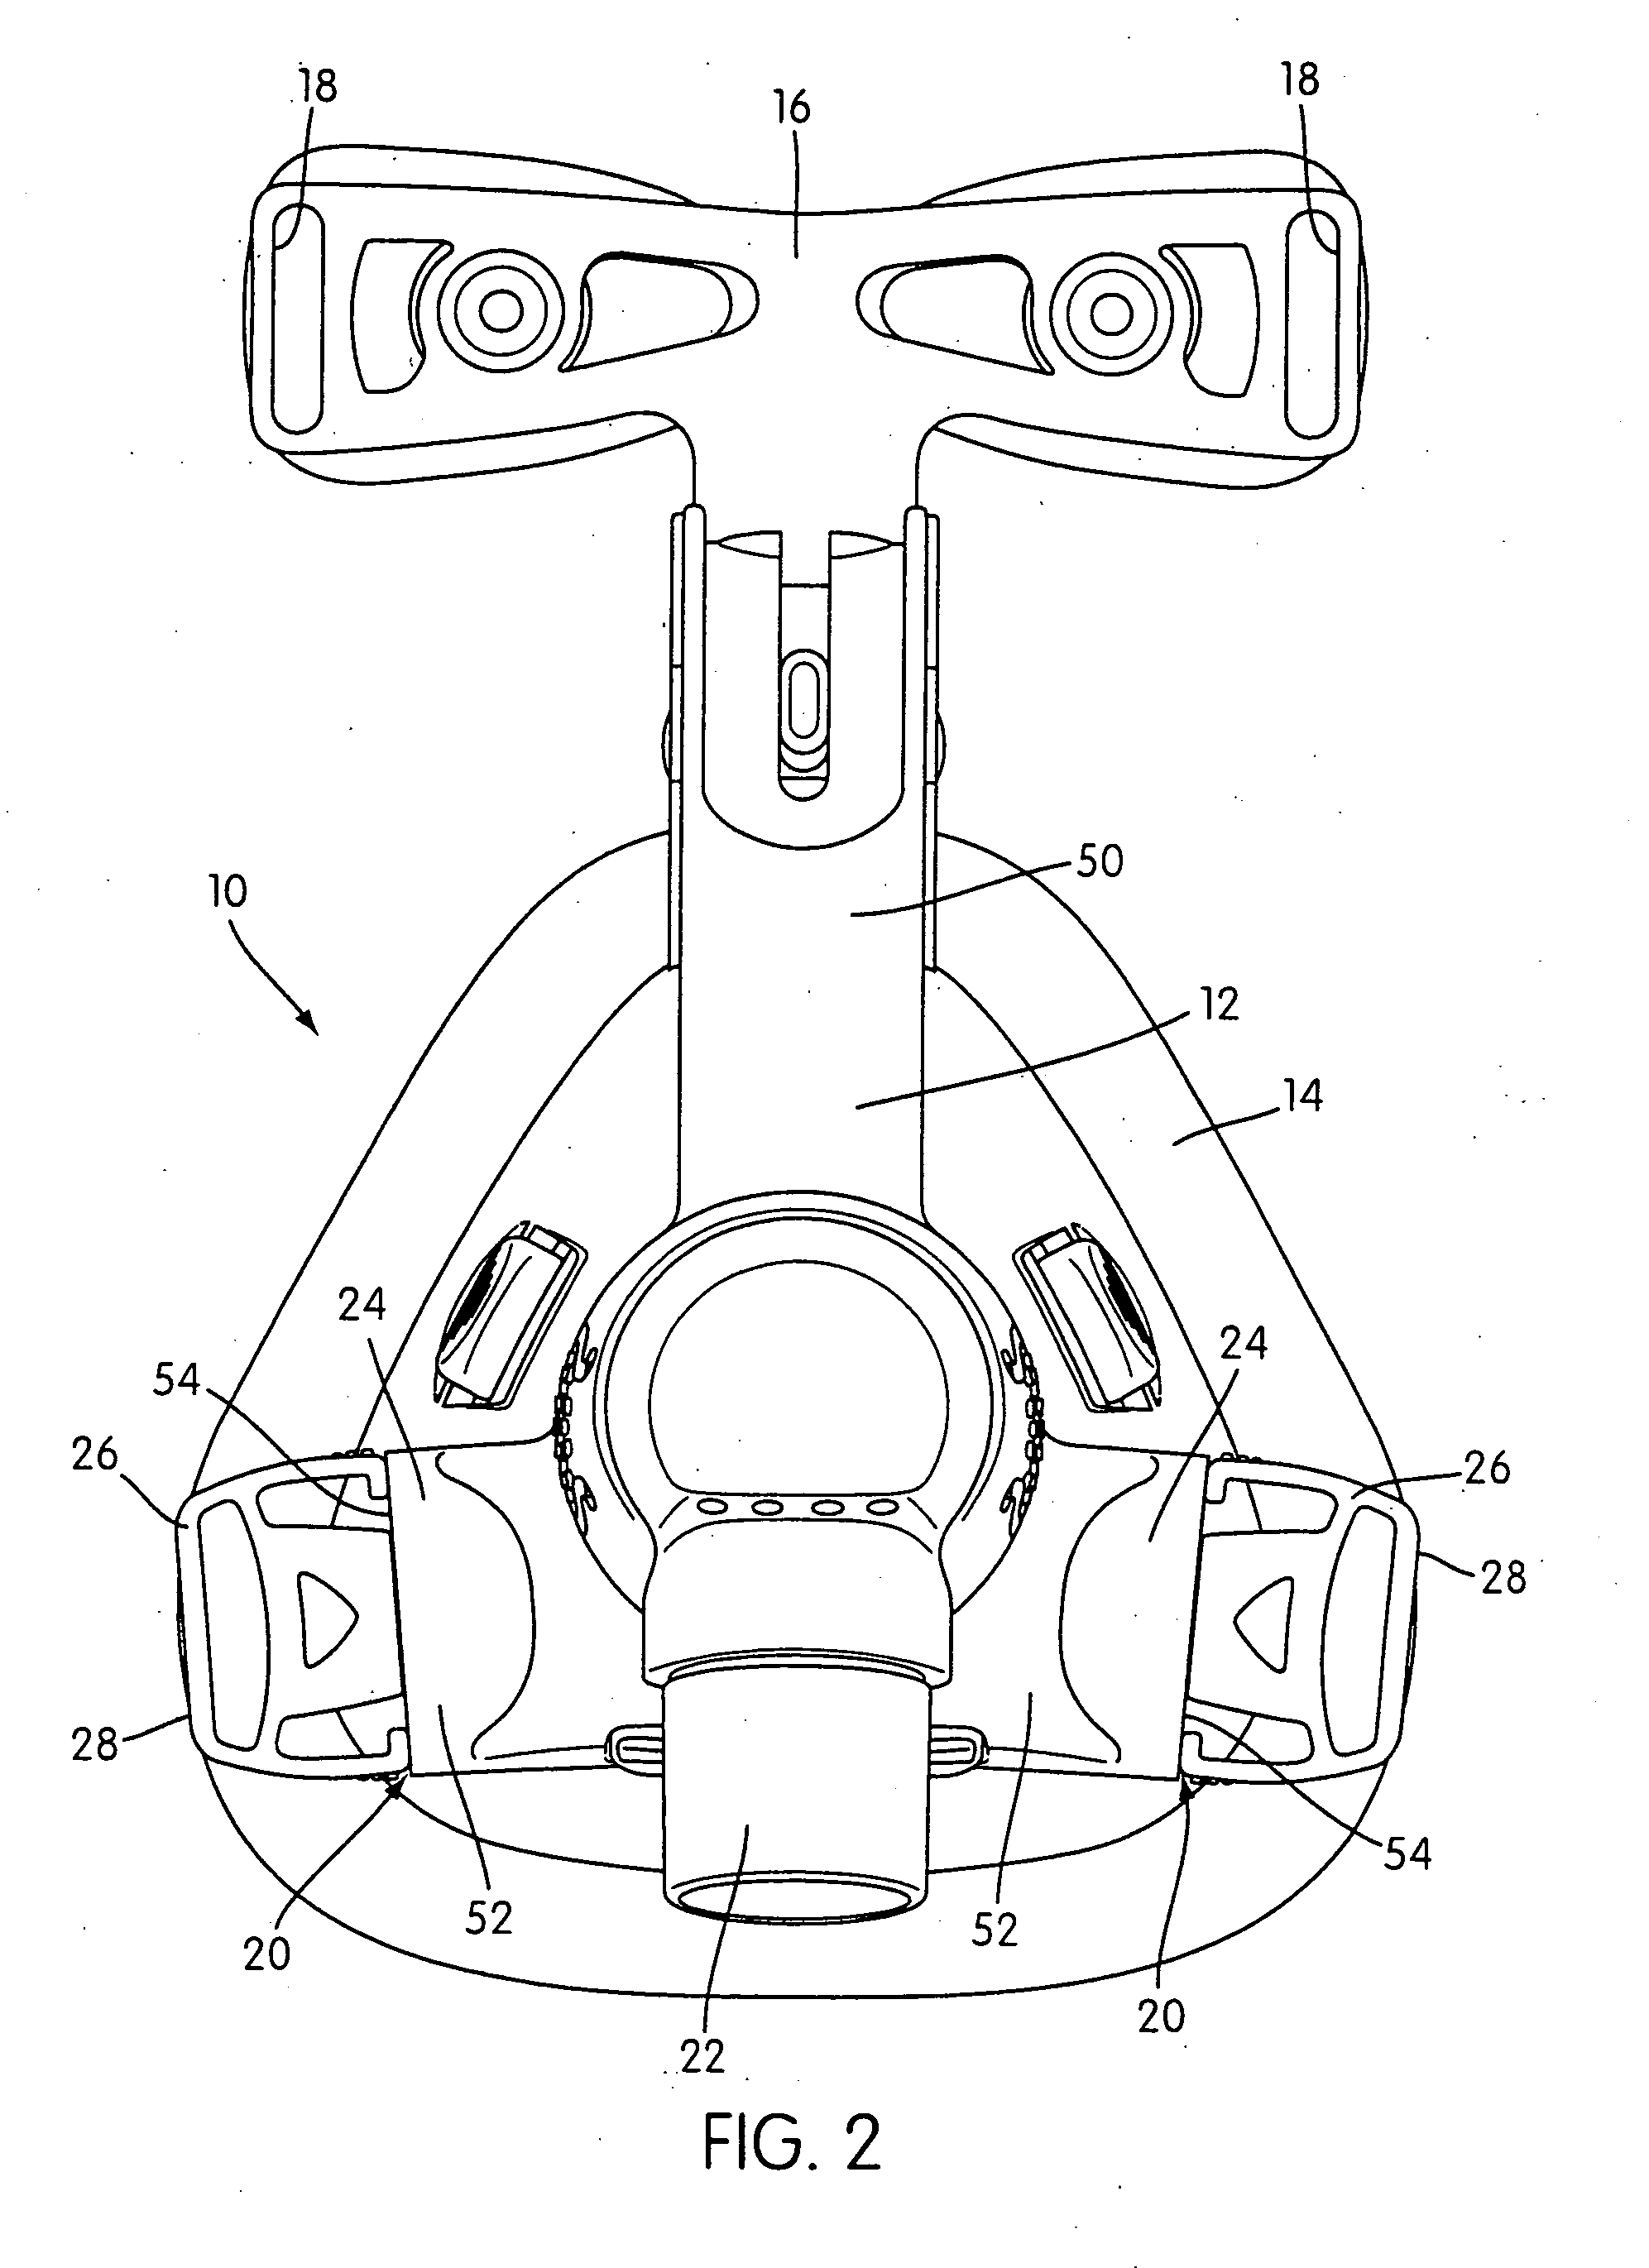 Headgear connection assembly for a respiratory mask